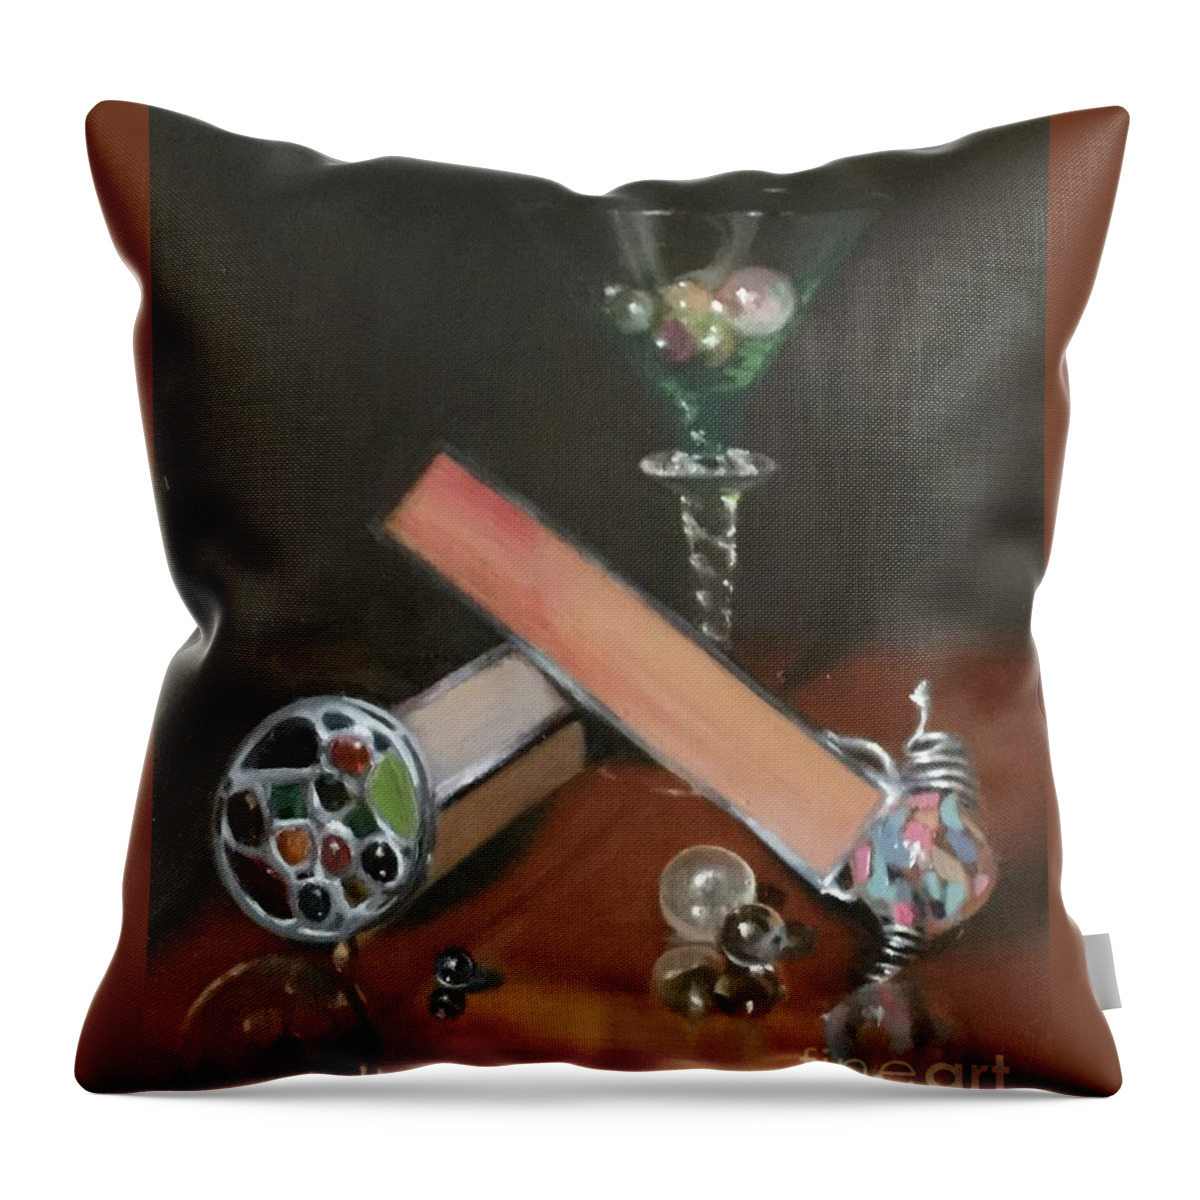 Oil Painting Throw Pillow featuring the painting Kaleidoscope by Lori Ippolito